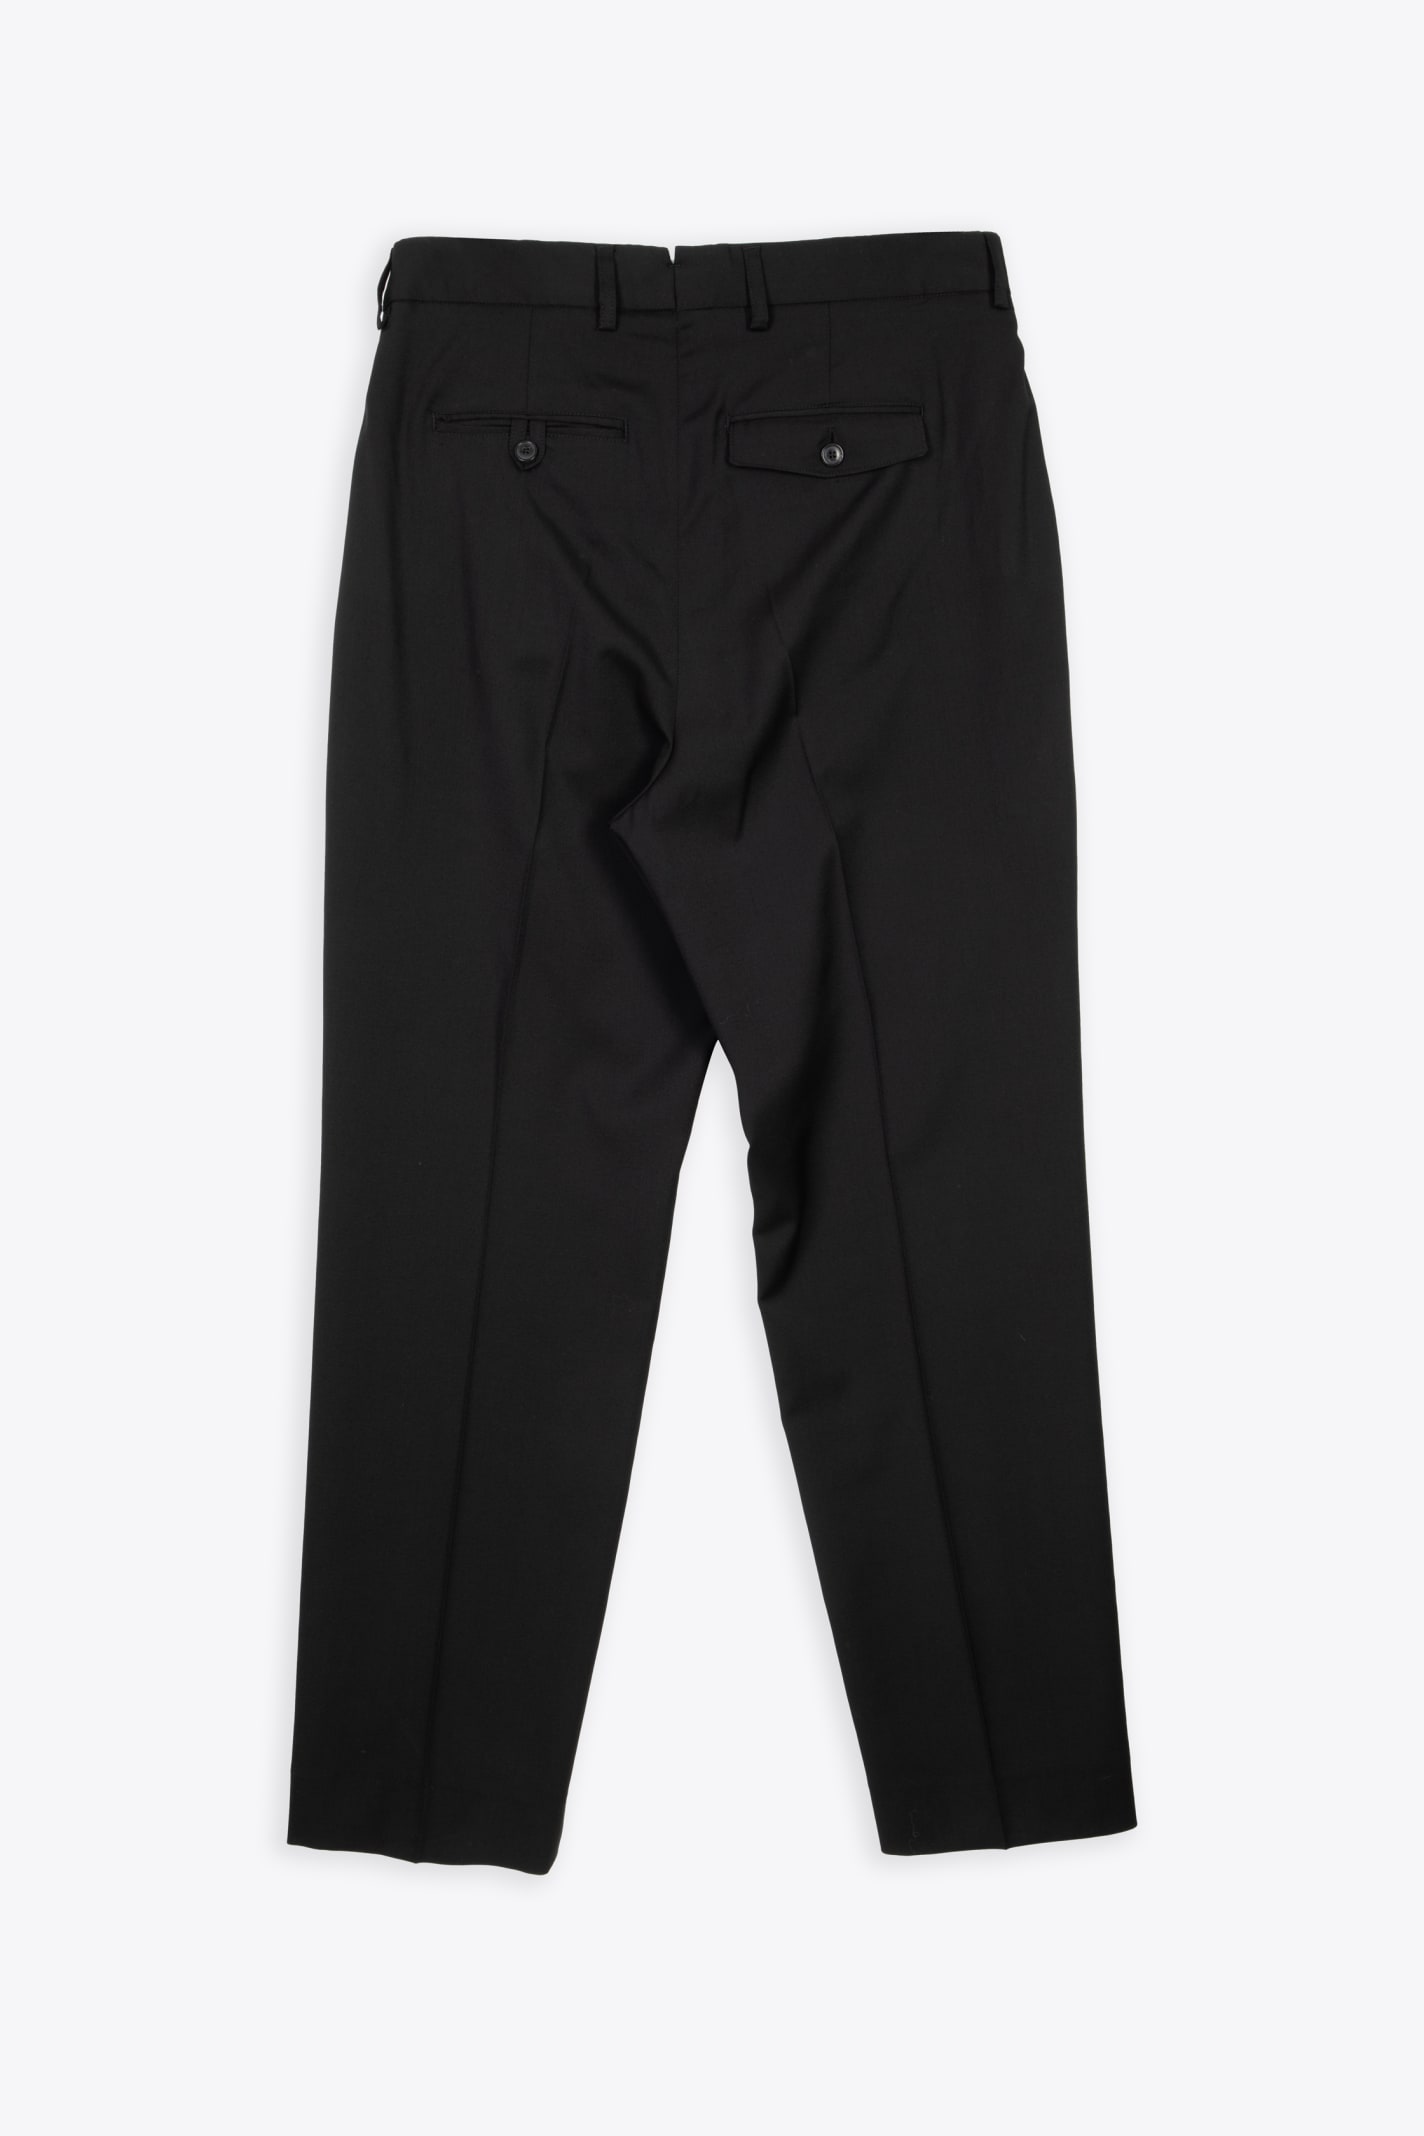 Shop Our Legacy Chino 22 Black Wool Tailored Pant - Chino 22 In Nero